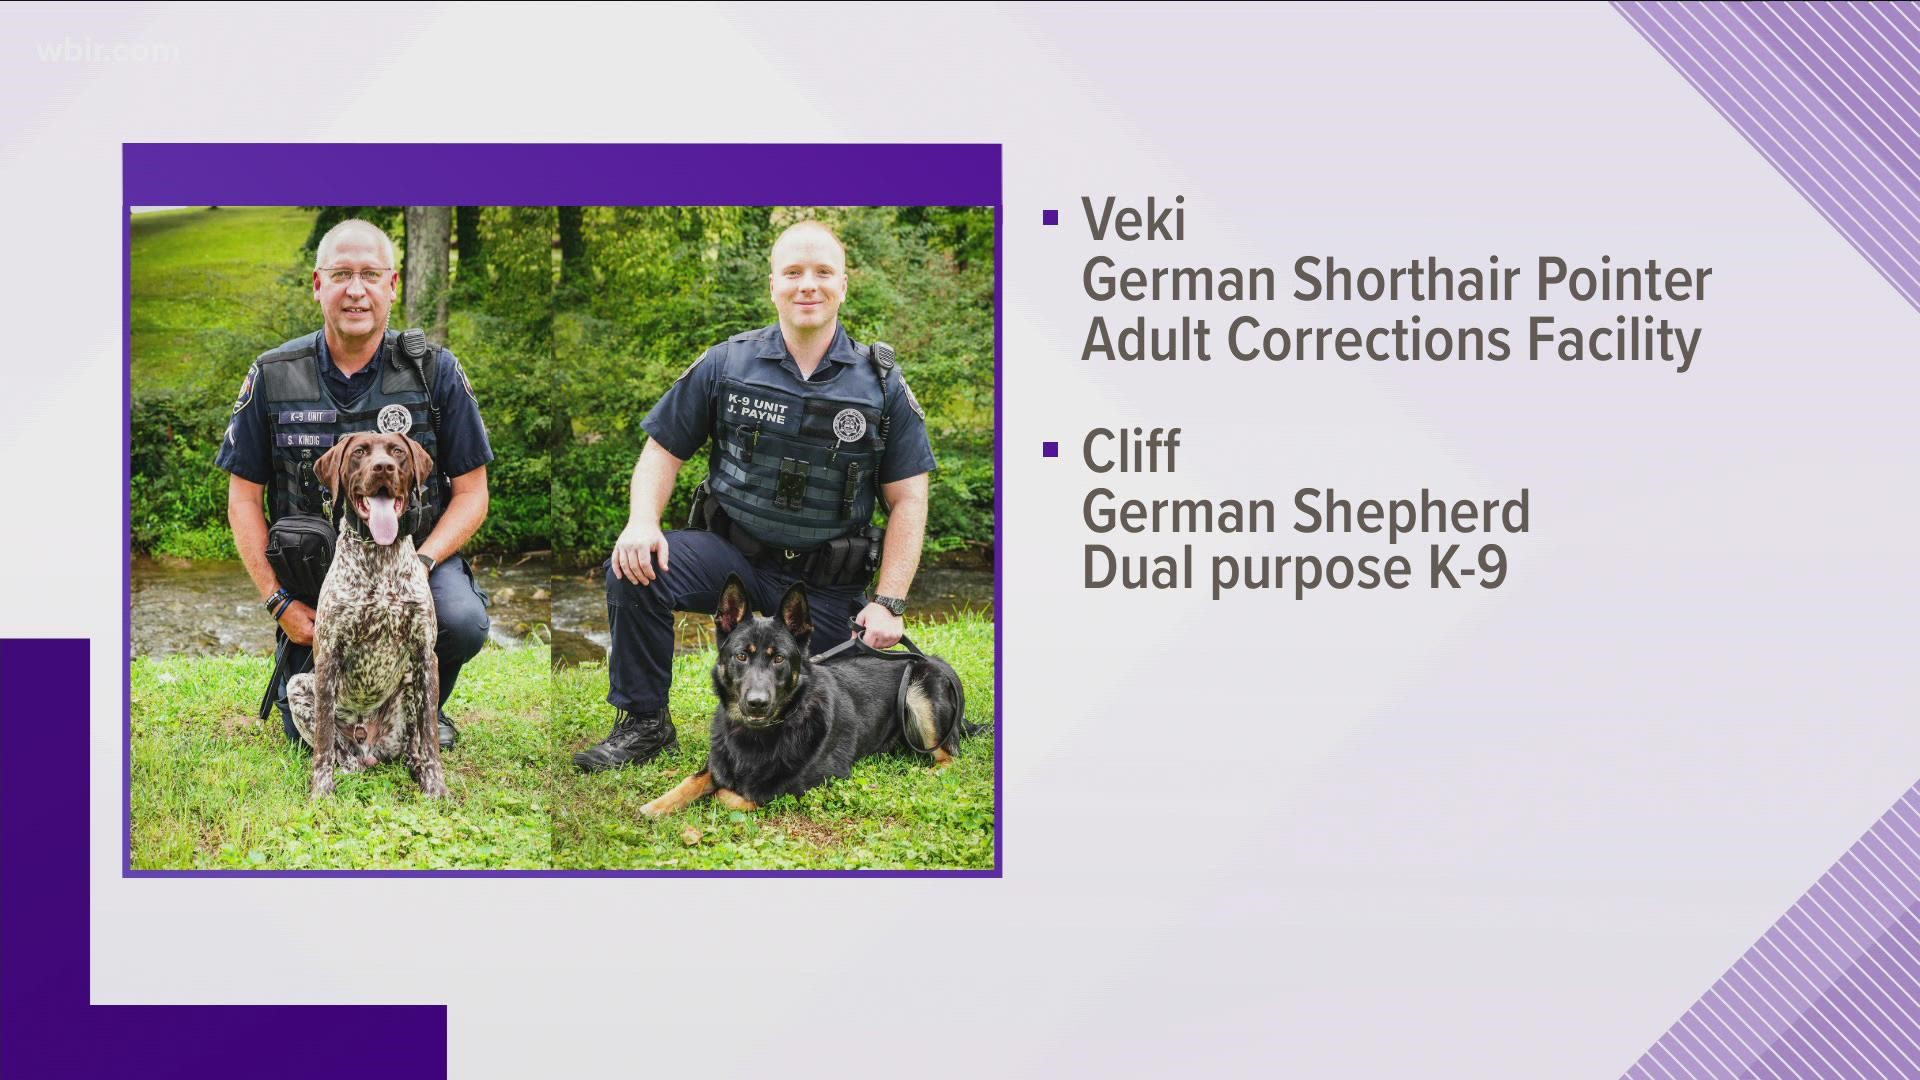 Veki is a german shorthair pointer born in Hungary and will work in the adult corrections facility. Cliff is a german shepherd from the Czech Republic.